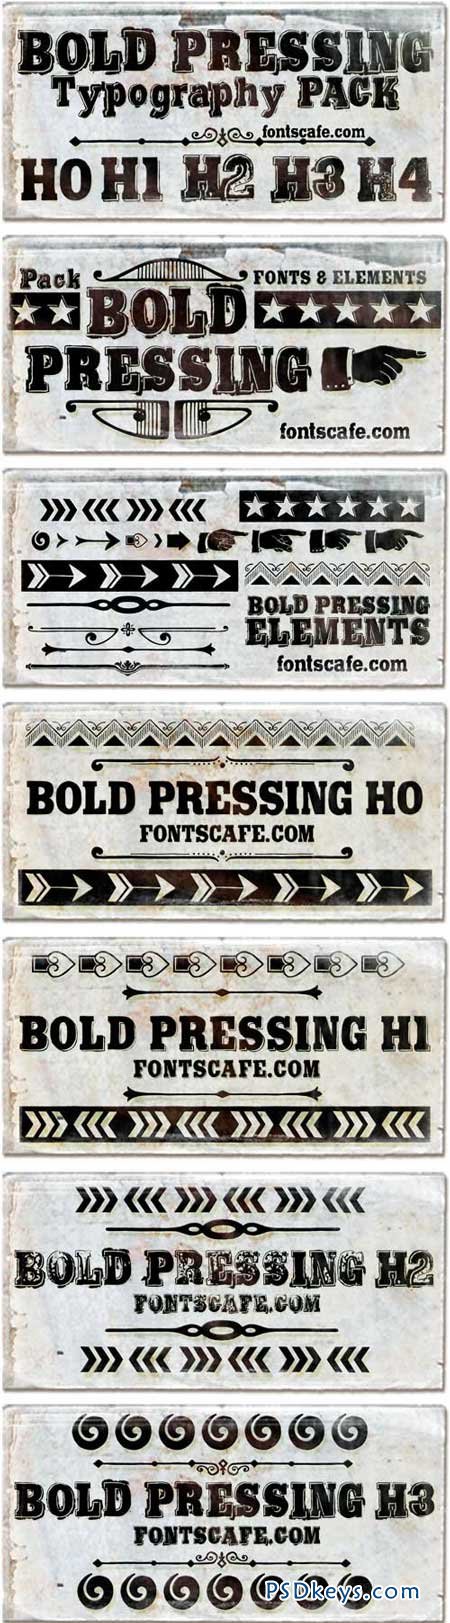 Bold Pressing Pack Font Family - 7 Fonts for $233